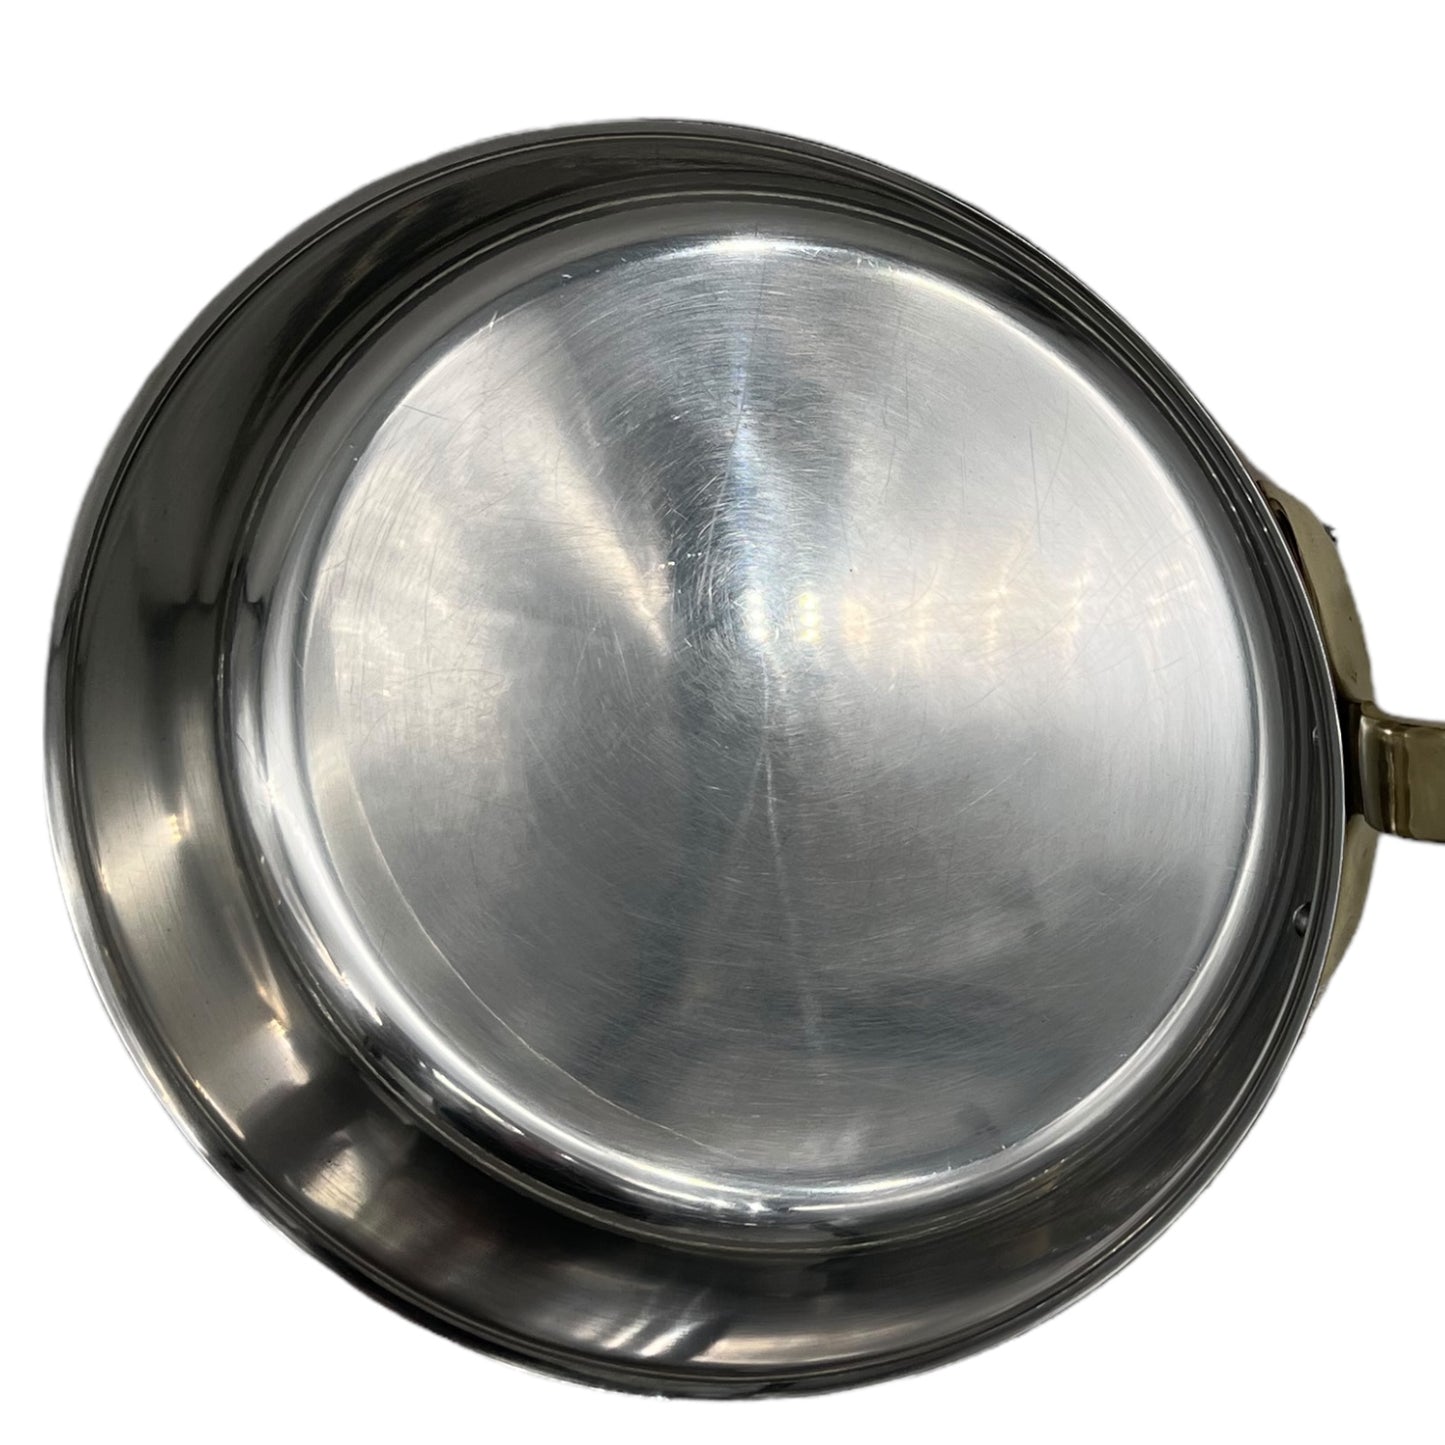 Professional copper frying pan with stainless steel lining 